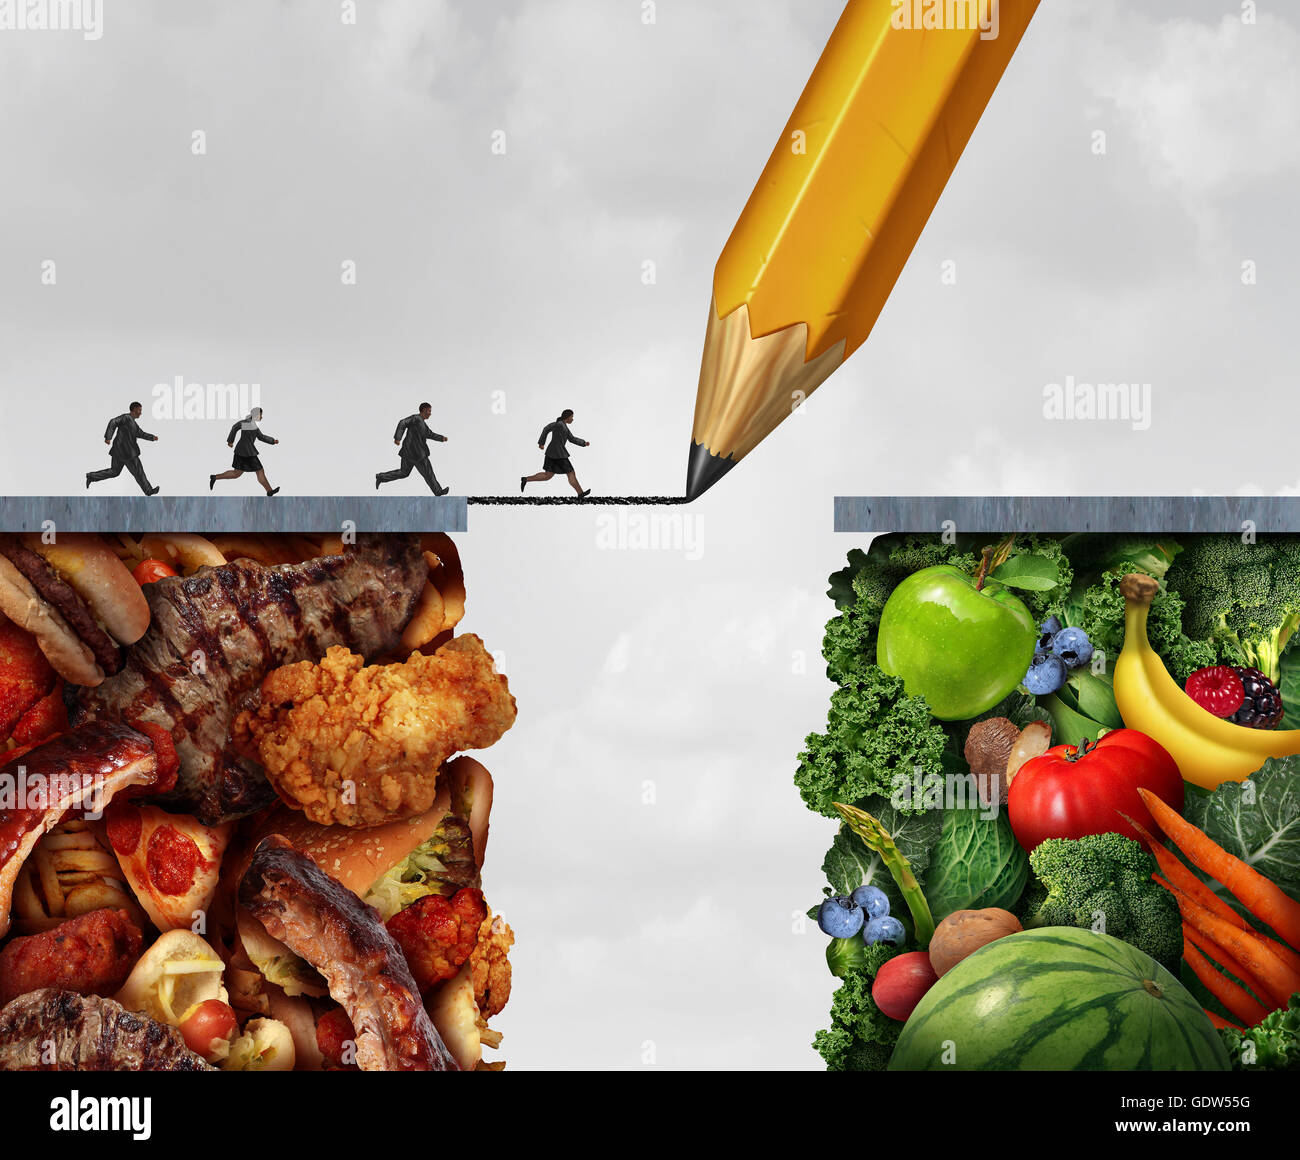 Changing to vegan and making a transition to vegetarian eating lifestyle as a group of overweight people running across a pencil drawing bridge from meat and greasy junk food towards fresh fruit and vegetables with 3D illustration elements. Stock Photo